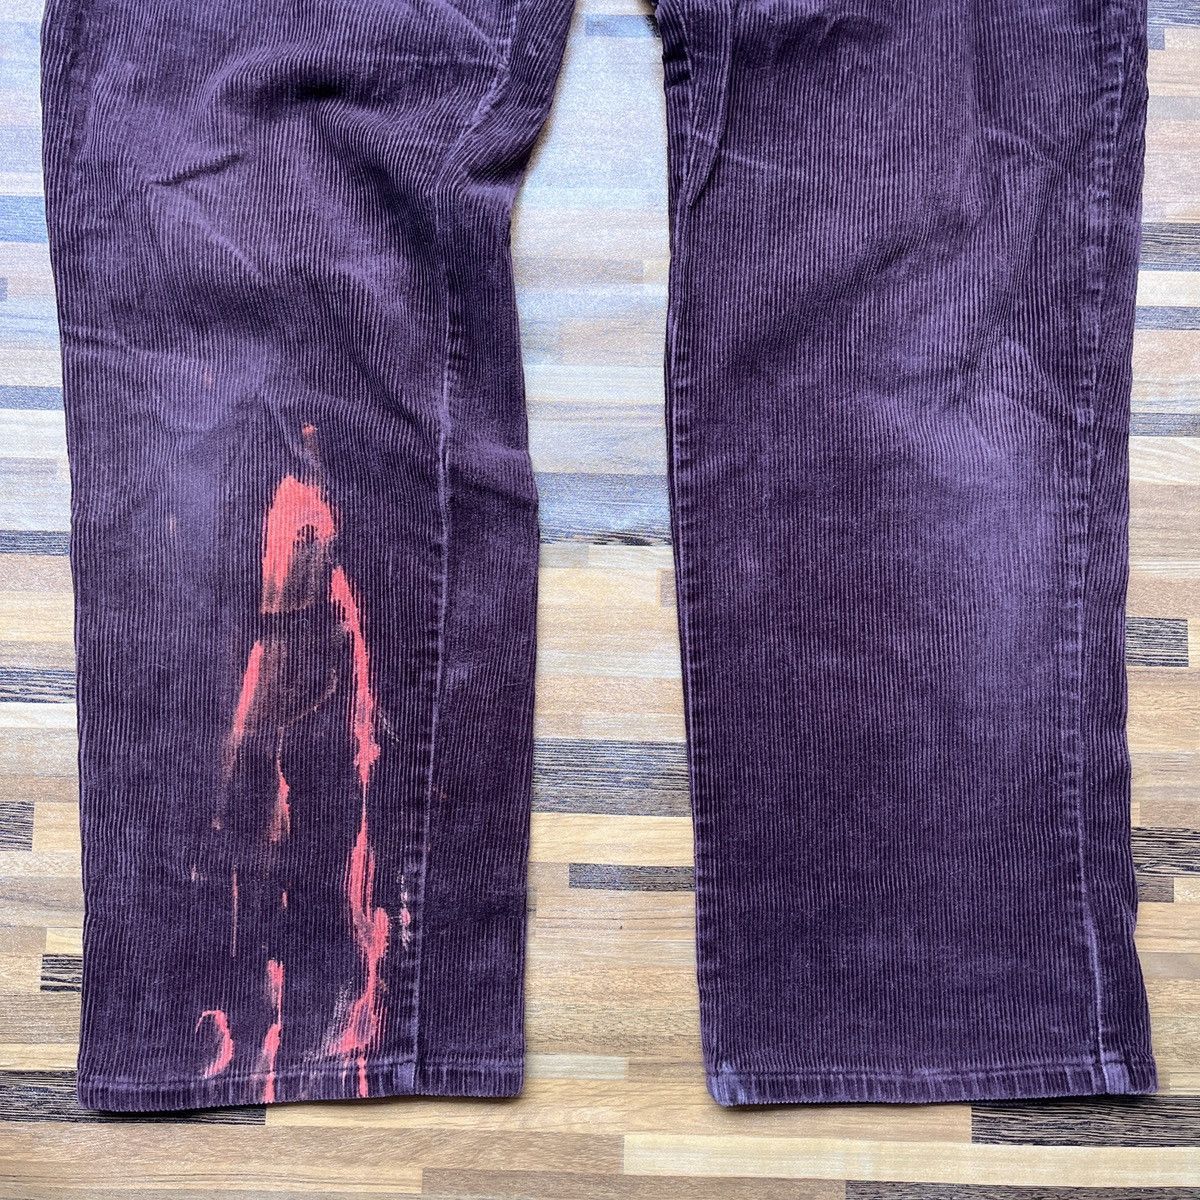 Issey Miyake - IY Grace Issey Japanese Brand Jeans Paints Splatters - 11